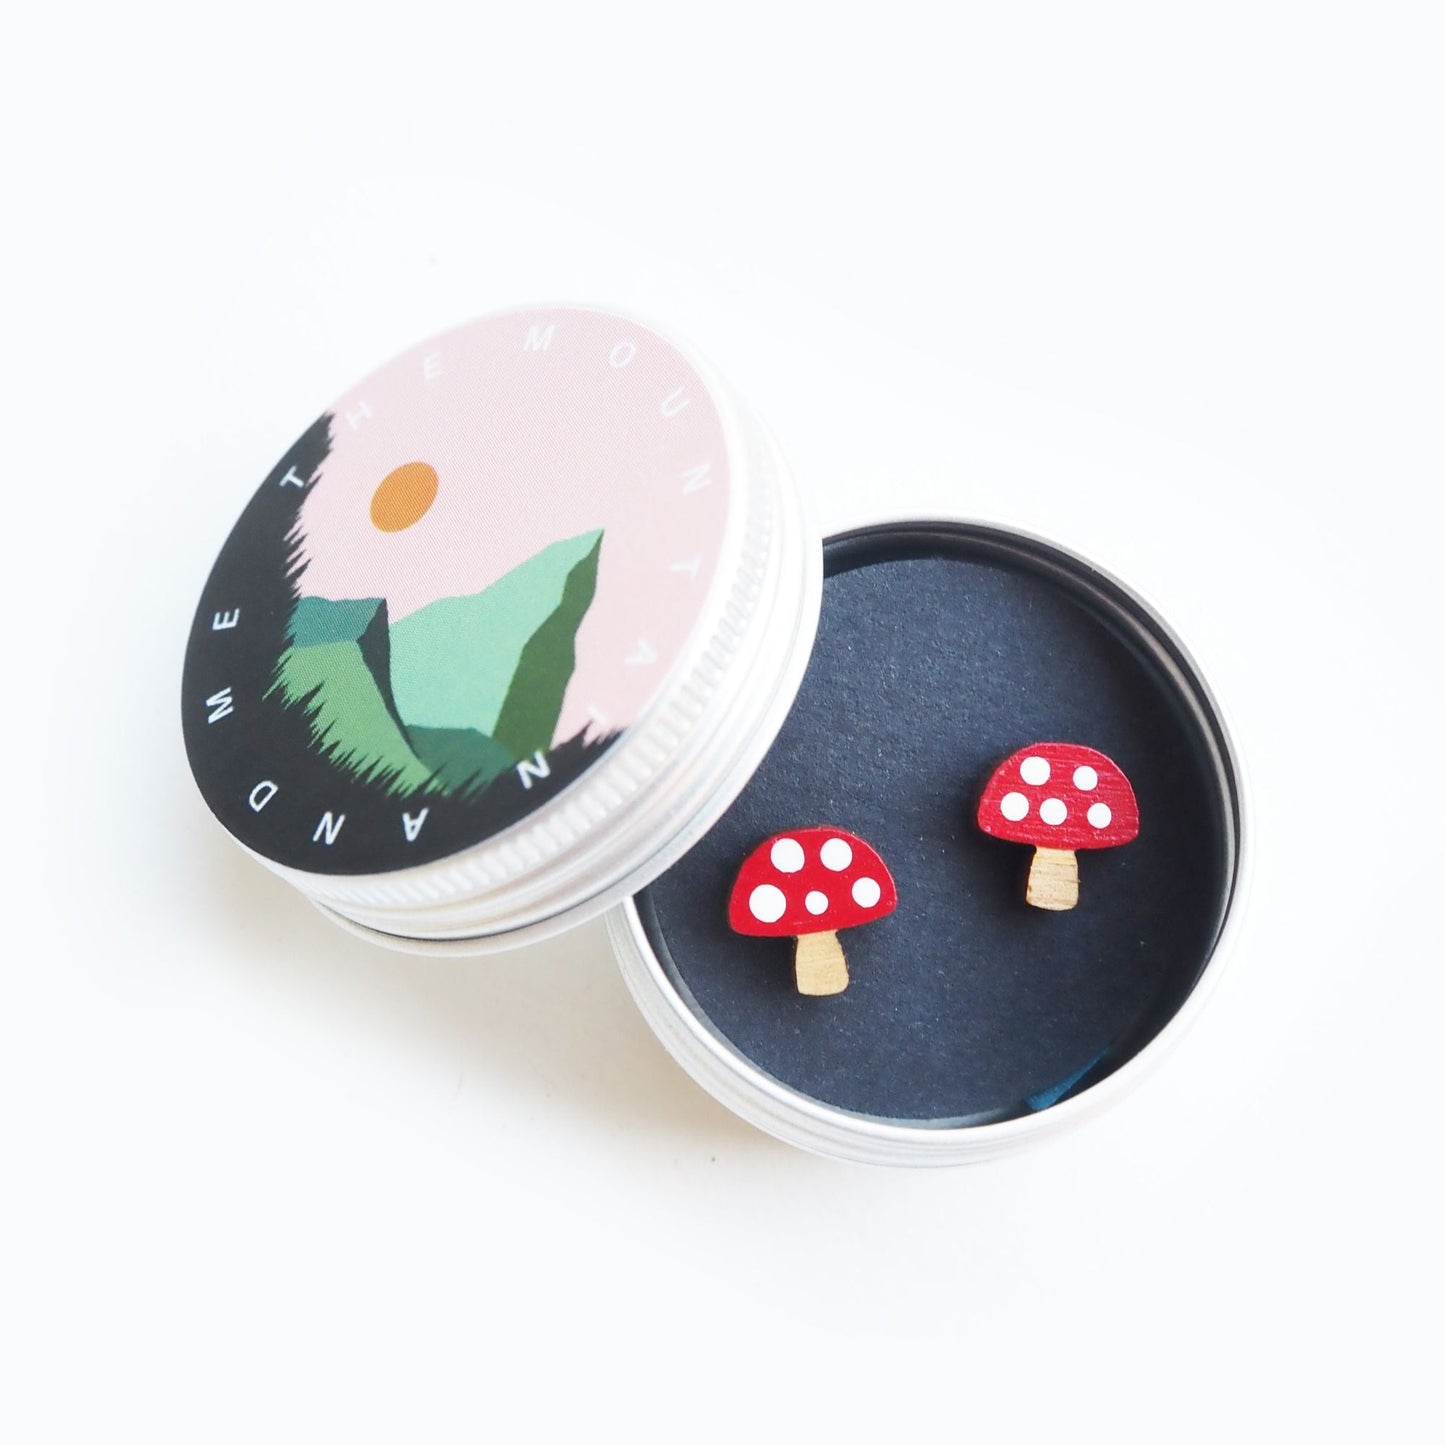 The red and white toadstool earrings inside the screw top tin. The lid is resting agaisnt the side of the open tin and has the mountain and me branding on it.